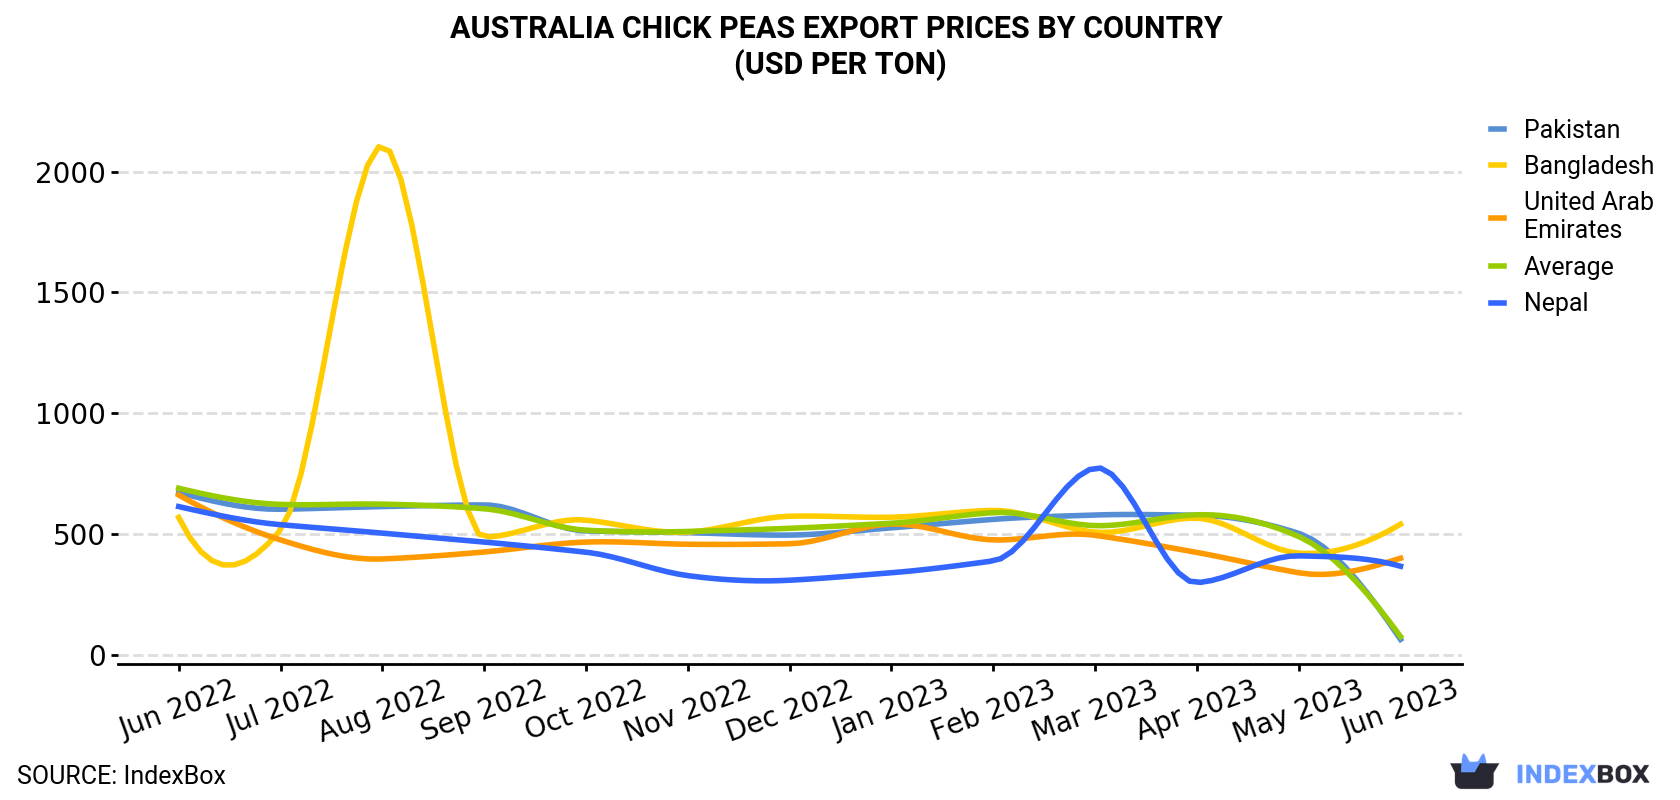 Australia Chick Peas Export Prices By Country (USD Per Ton)